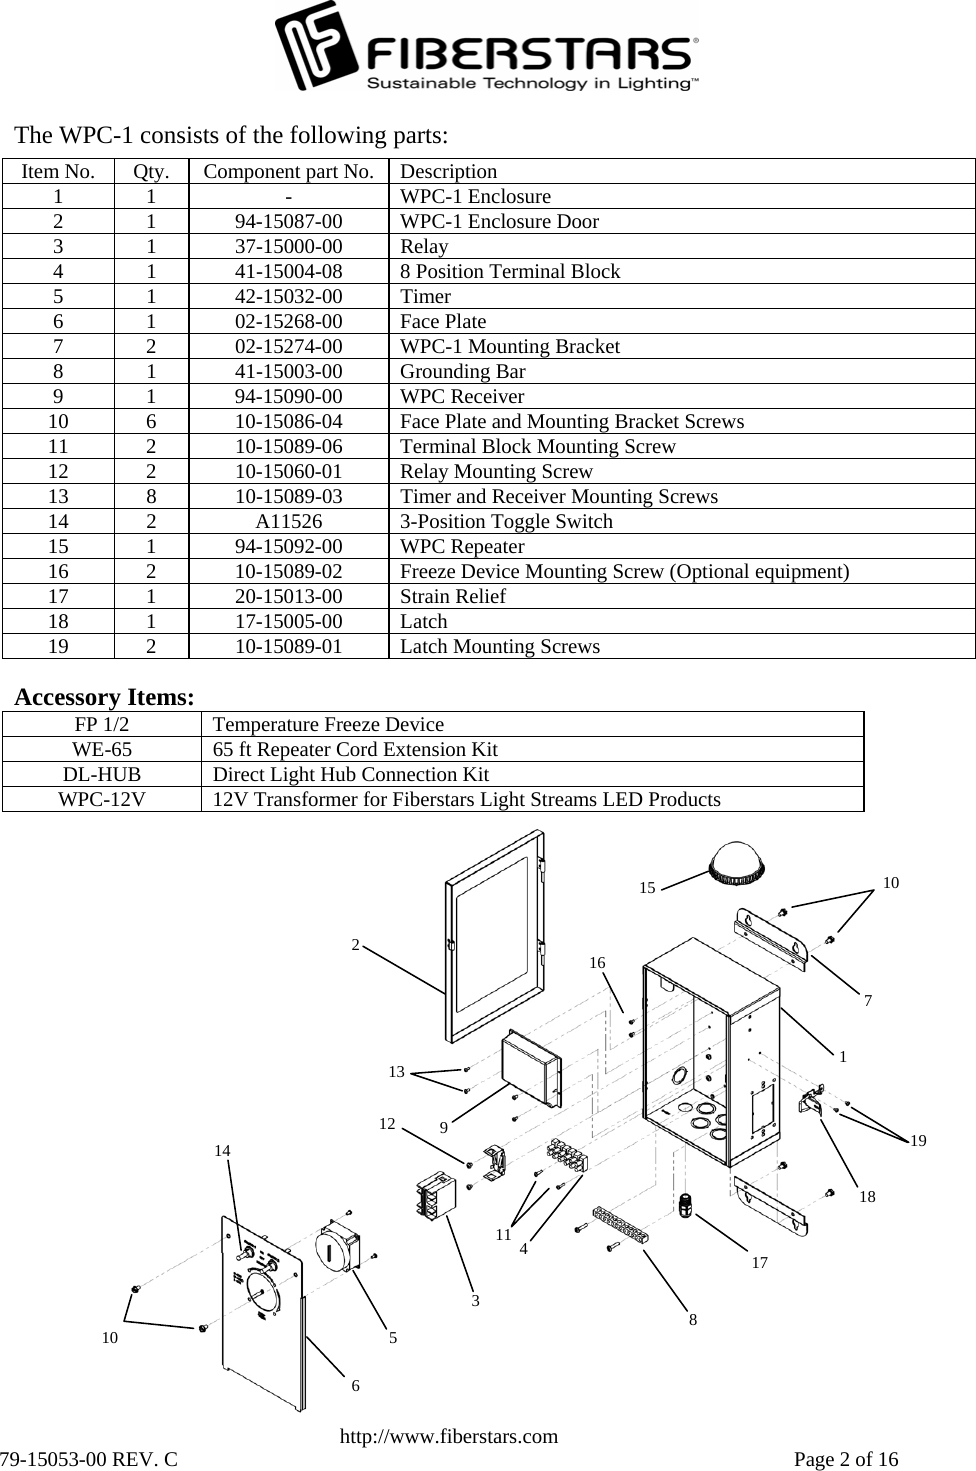   http://www.fiberstars.com 79-15053-00 REV. C    Page 2 of 16 181917 16151413121010 9 8 7 6 5 4 113 2 1 Accessory Items: FP 1/2  Temperature Freeze Device WE-65  65 ft Repeater Cord Extension Kit DL-HUB  Direct Light Hub Connection Kit WPC-12V  12V Transformer for Fiberstars Light Streams LED Products The WPC-1 consists of the following parts:  Item No.  Qty.  Component part No.  Description 1 1  -  WPC-1 Enclosure 2 1 94-15087-00 WPC-1 Enclosure Door 3 1 37-15000-00 Relay 4  1  41-15004-08  8 Position Terminal Block 5 1 42-15032-00 Timer 6 1 02-15268-00 Face Plate 7  2  02-15274-00  WPC-1 Mounting Bracket 8 1 41-15003-00 Grounding Bar 9 1 94-15090-00 WPC Receiver 10  6  10-15086-04  Face Plate and Mounting Bracket Screws 11  2  10-15089-06  Terminal Block Mounting Screw 12  2  10-15060-01  Relay Mounting Screw 13  8  10-15089-03  Timer and Receiver Mounting Screws 14  2  A11526  3-Position Toggle Switch 15 1 94-15092-00 WPC Repeater 16  2  10-15089-02  Freeze Device Mounting Screw (Optional equipment) 17 1 20-15013-00 Strain Relief 18 1 17-15005-00 Latch 19  2  10-15089-01  Latch Mounting Screws 